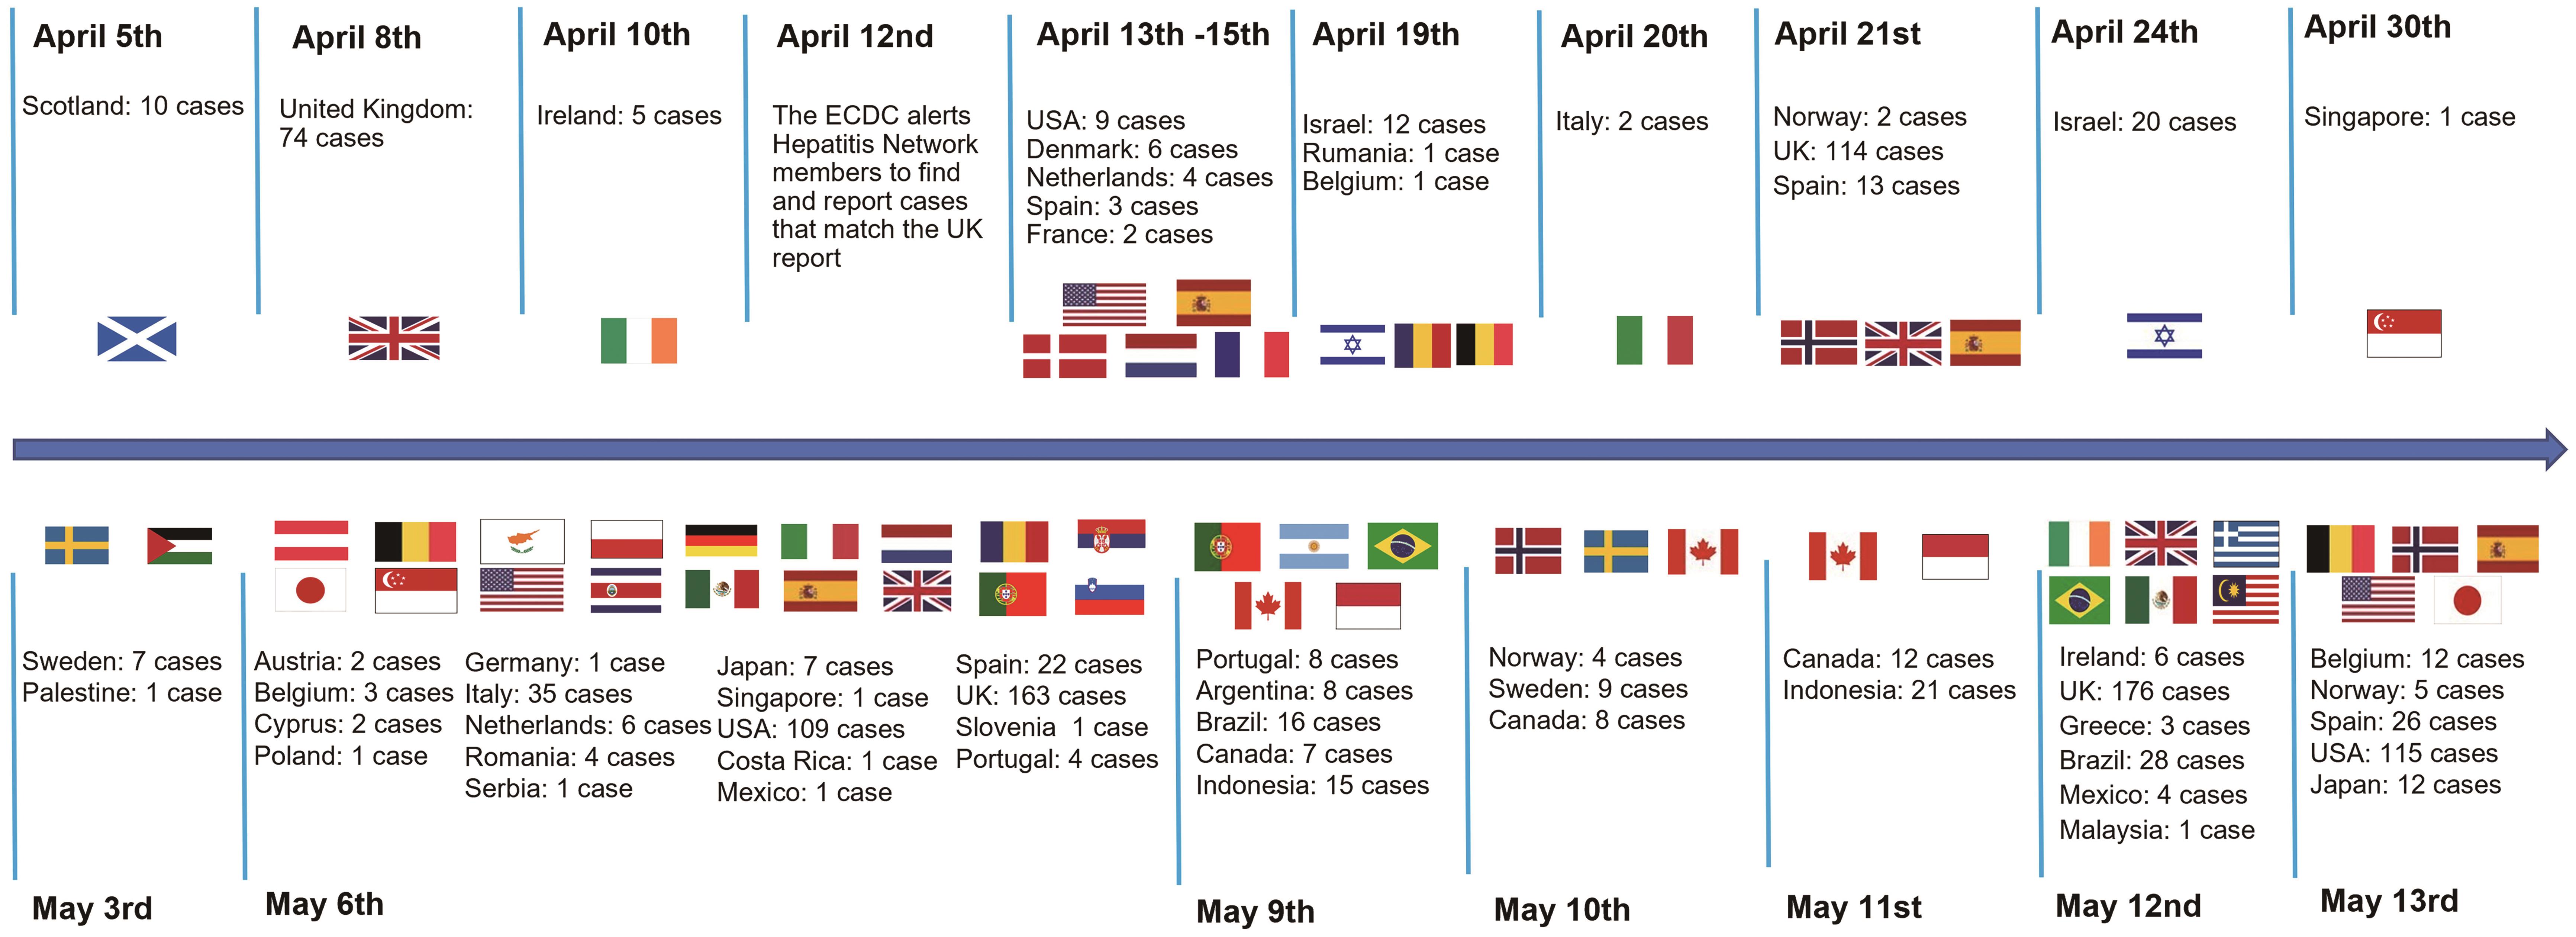 Timeline of reported cases of hepatitis of unknown origin in children from April 5 to May 13.